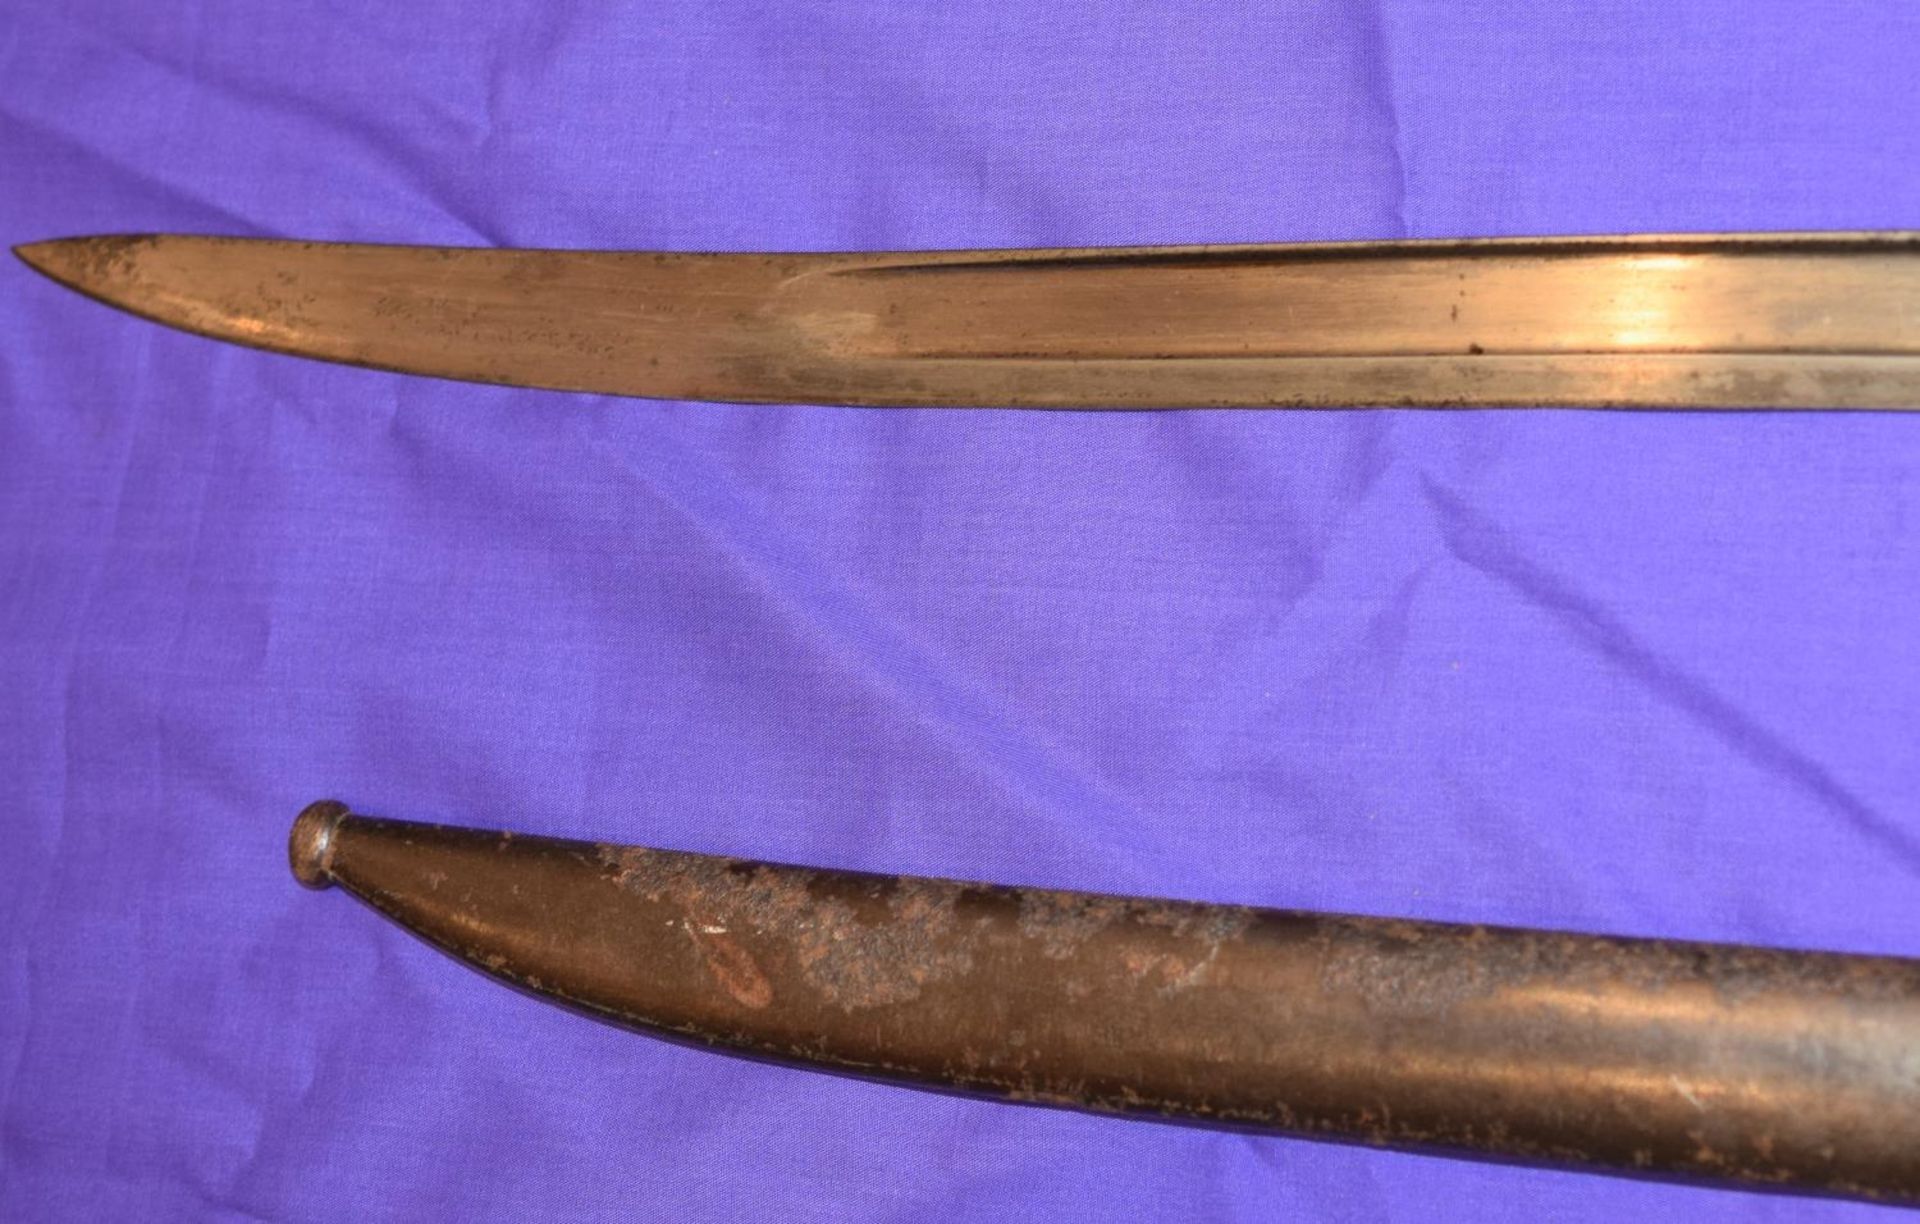 French Chassepot Gras Rifle Bayonet - Image 3 of 3